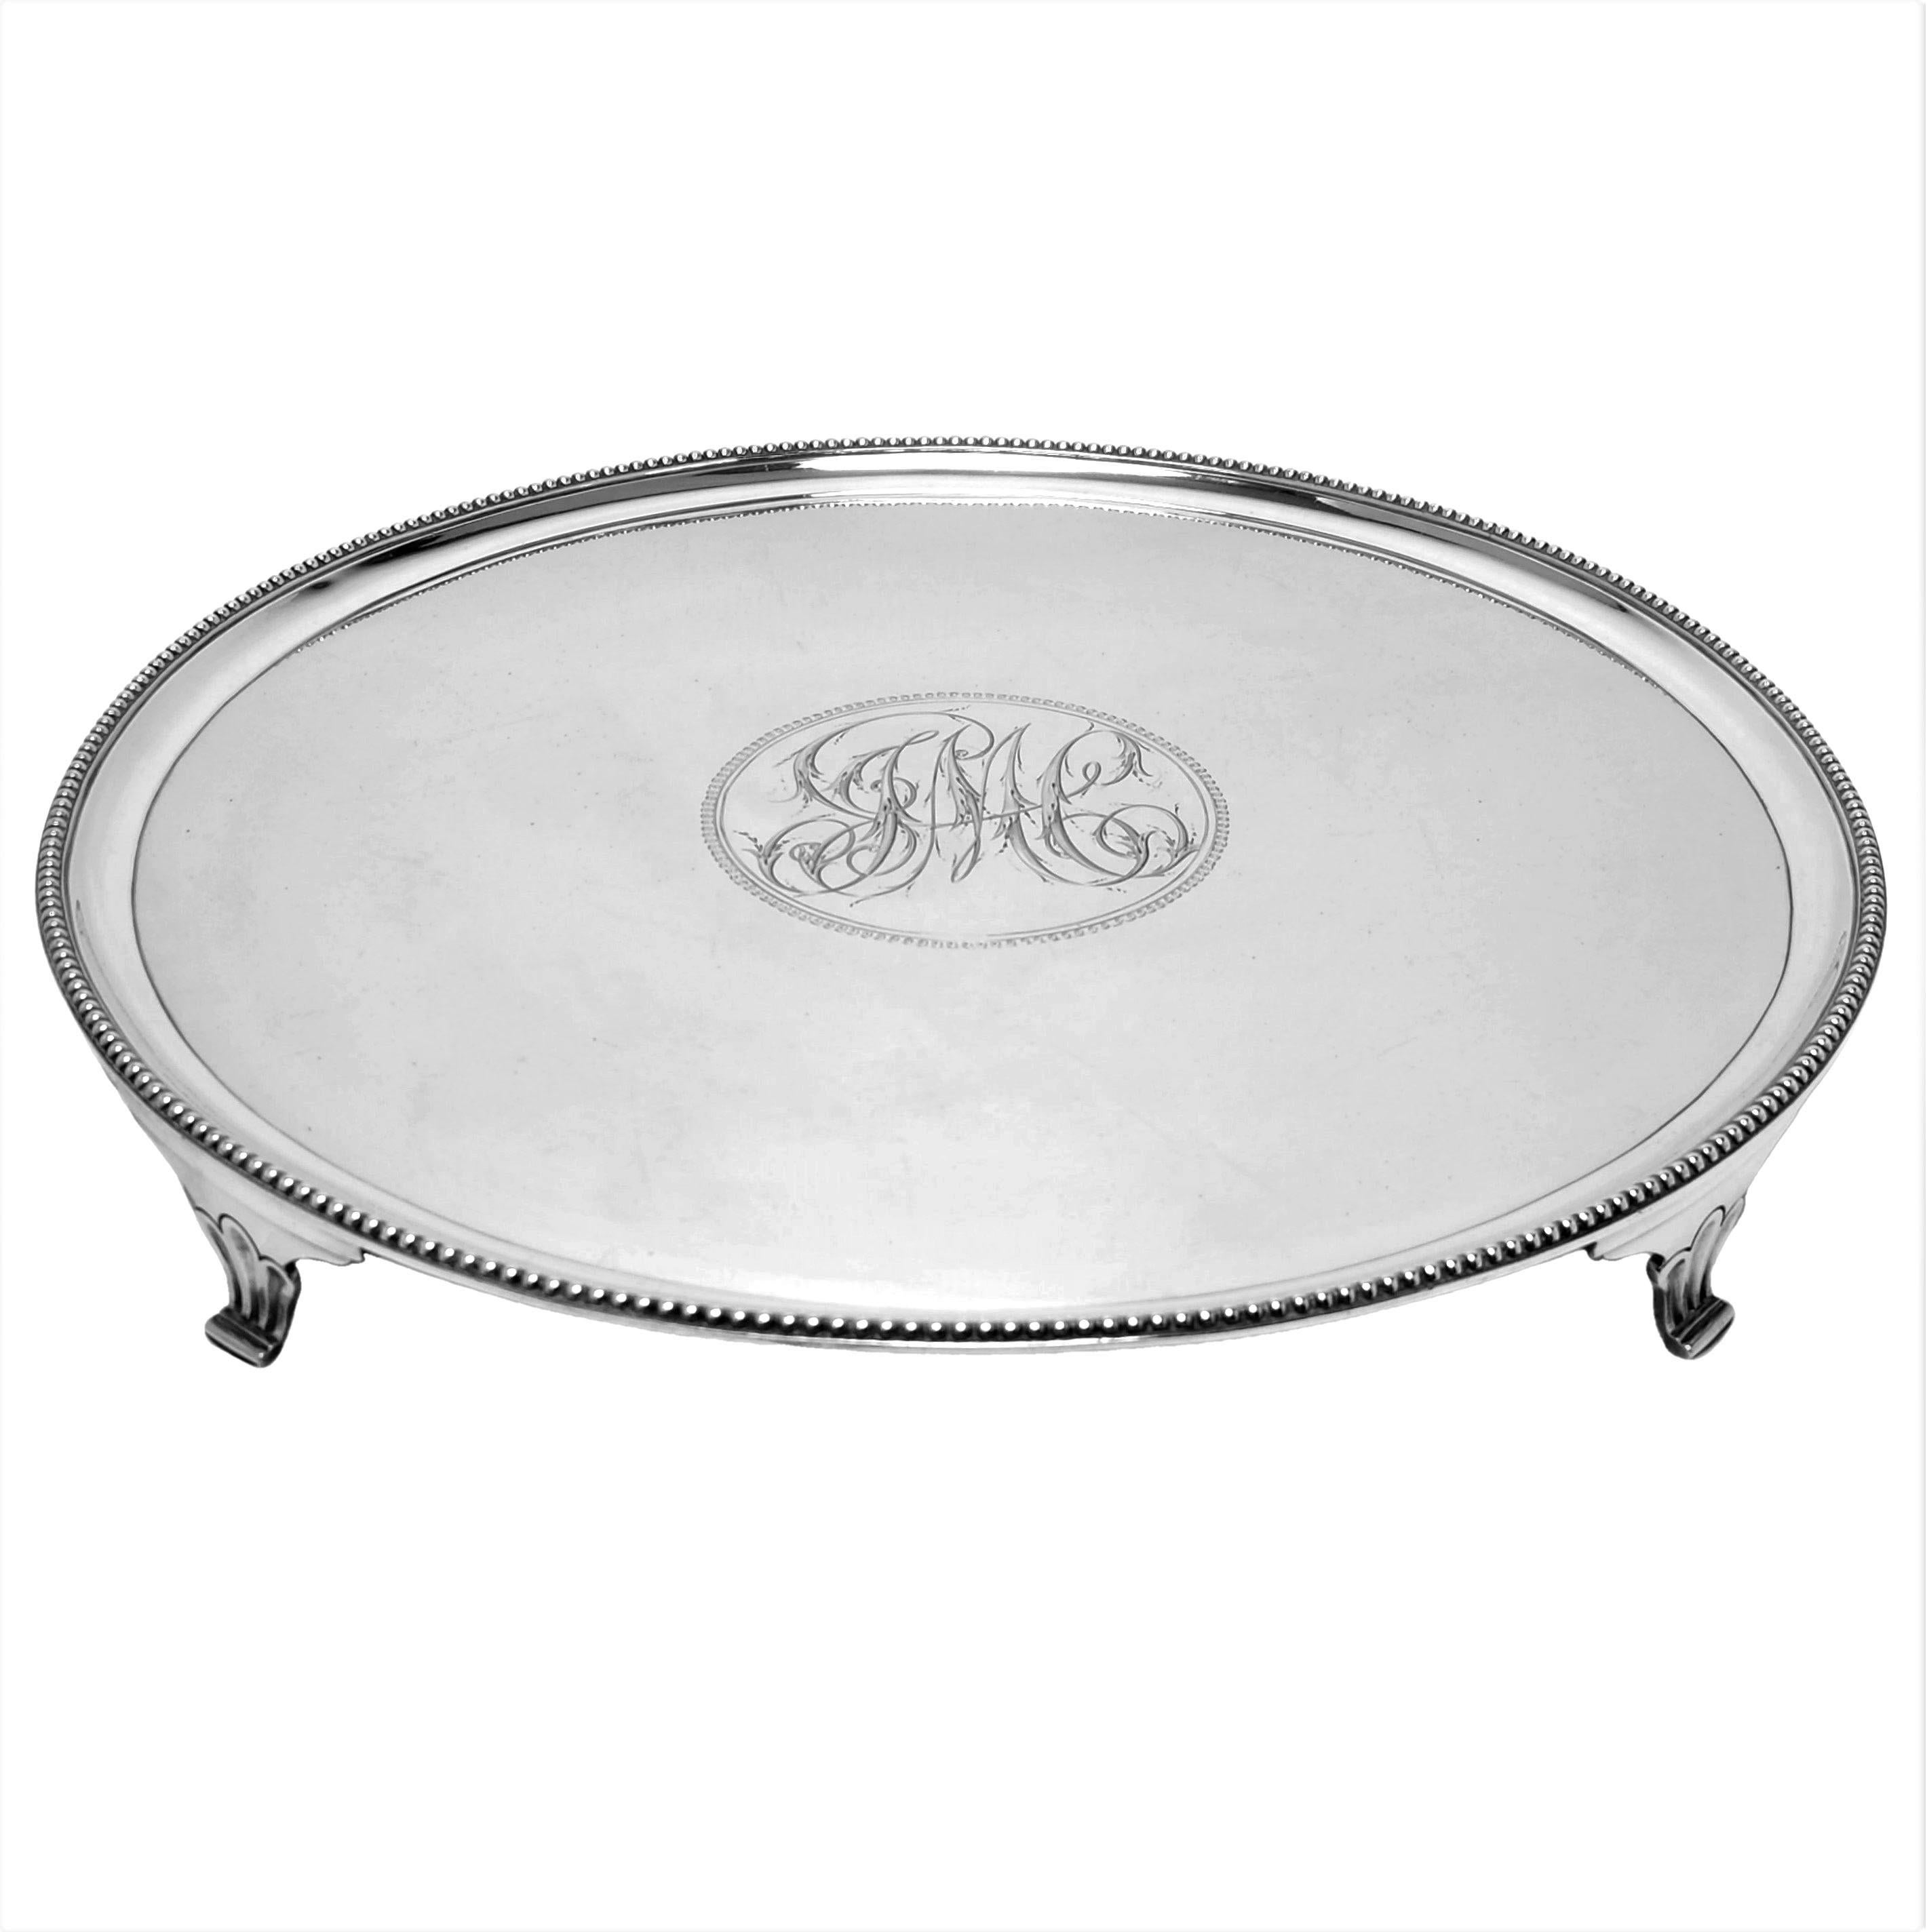 A traditional Antique George III solid silver Salver. This Salver has a round form embellished with a classic bead border and has a sizable engraved monogram in the centre. The Salver stands on four shaped feet.

Made in London, England in 1785 by